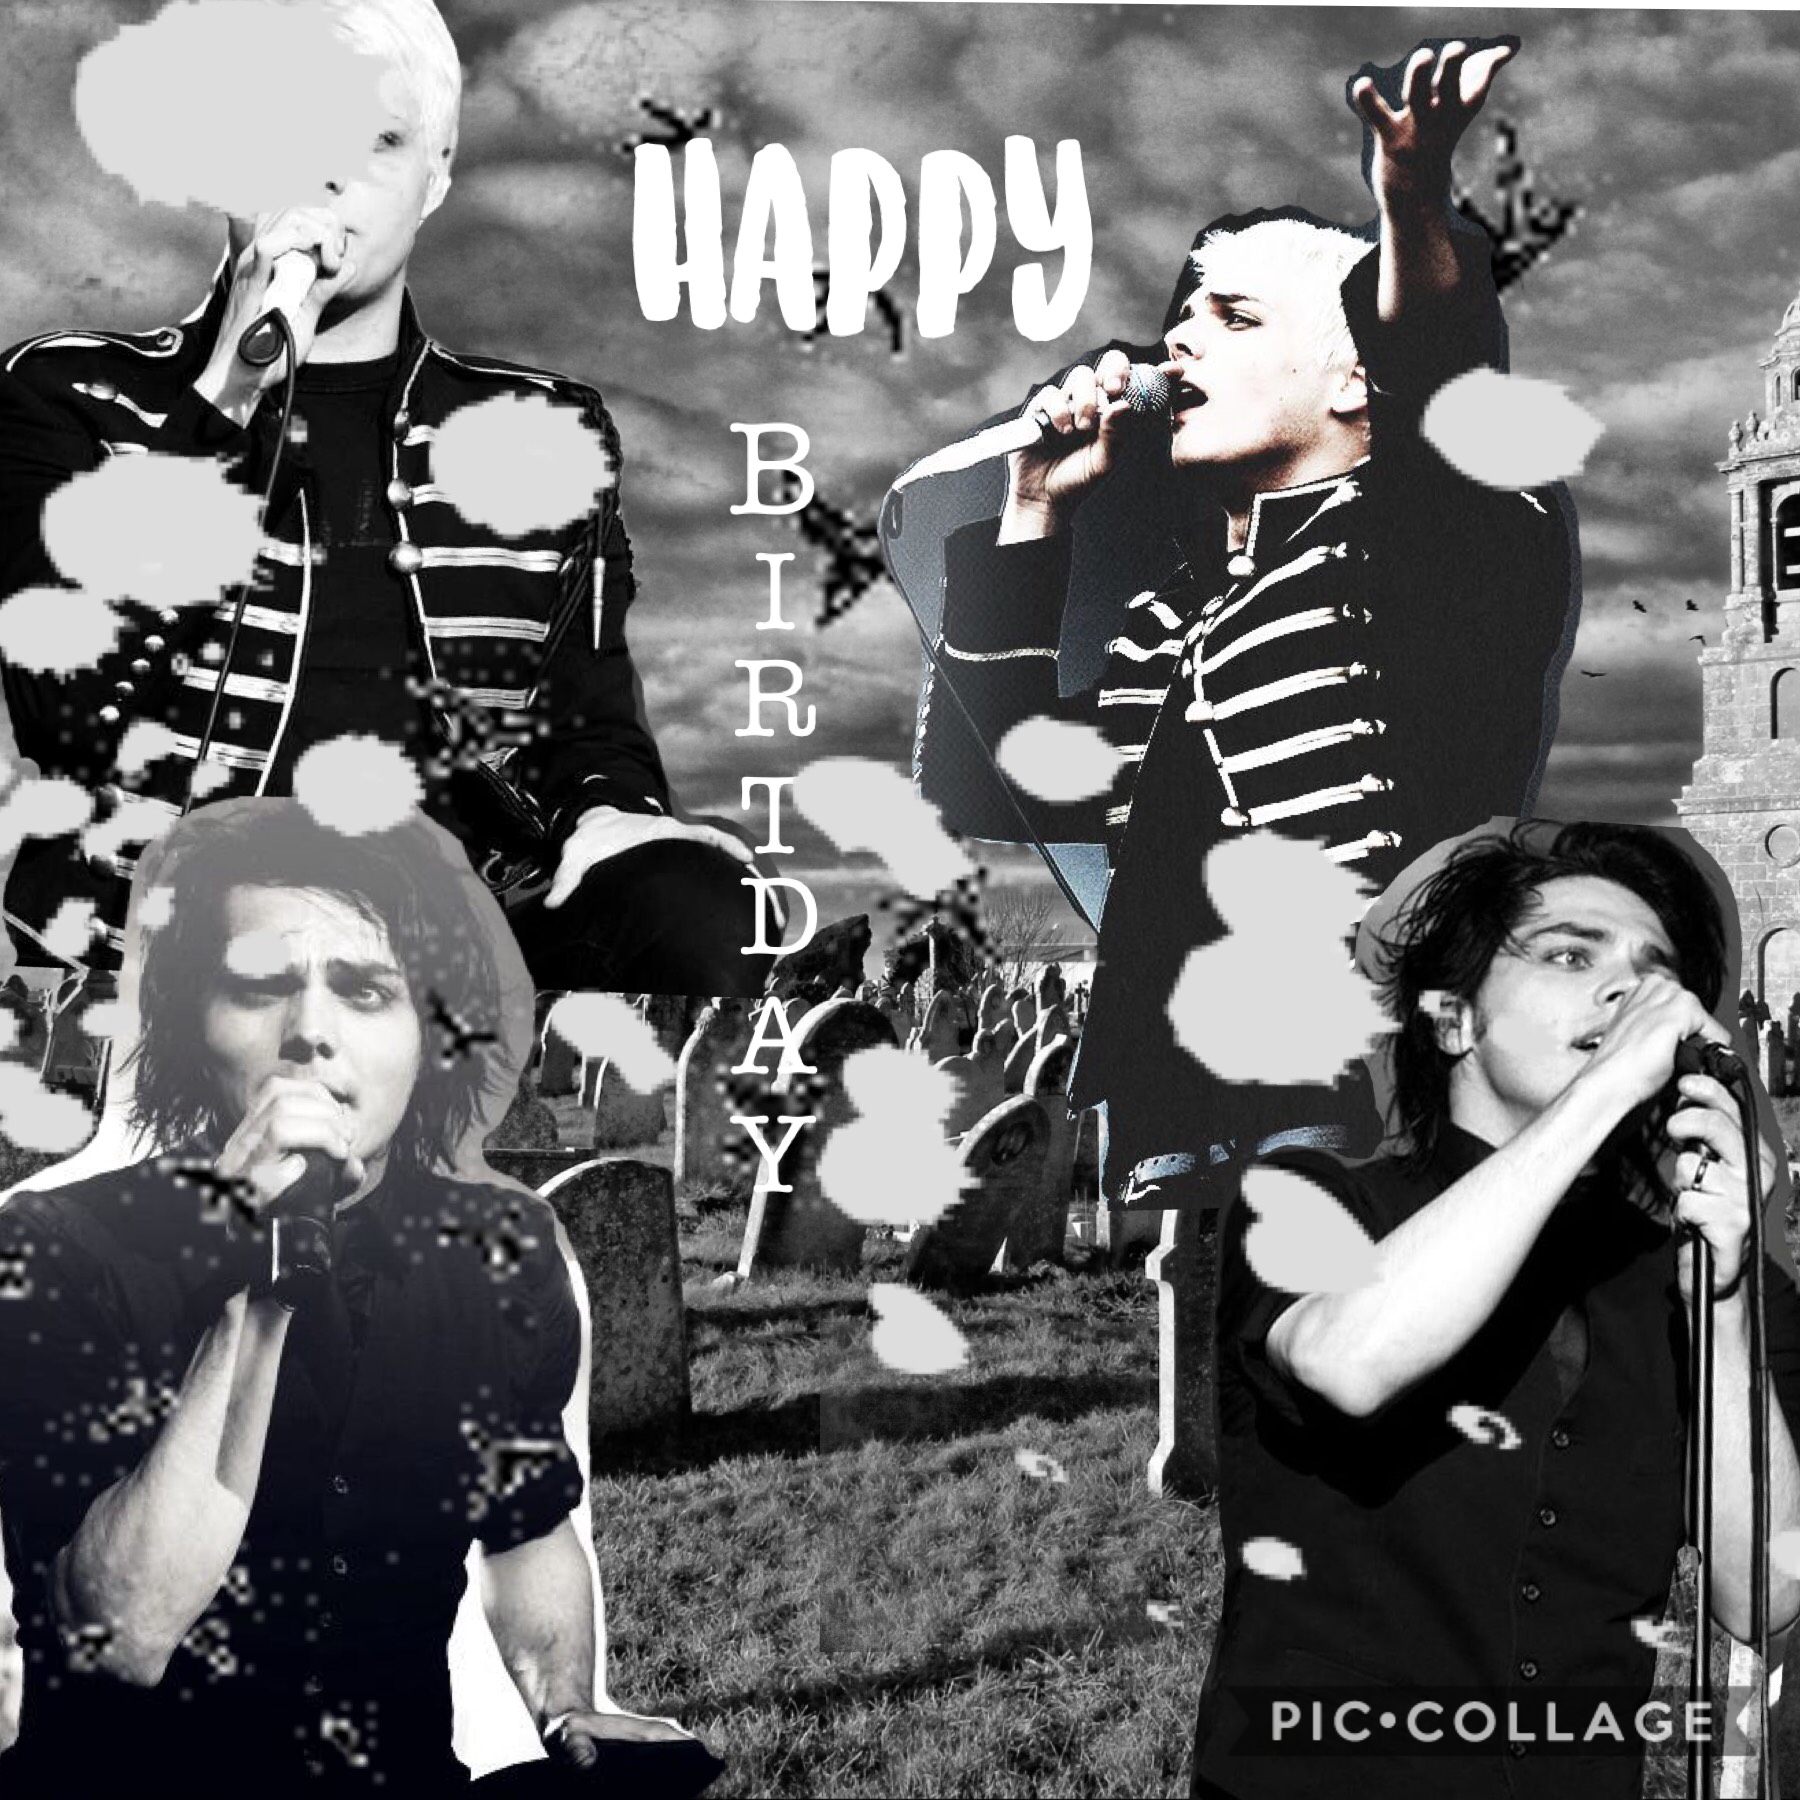 🖤messy but I tried, happy birthday Gee, 42 years young🖤